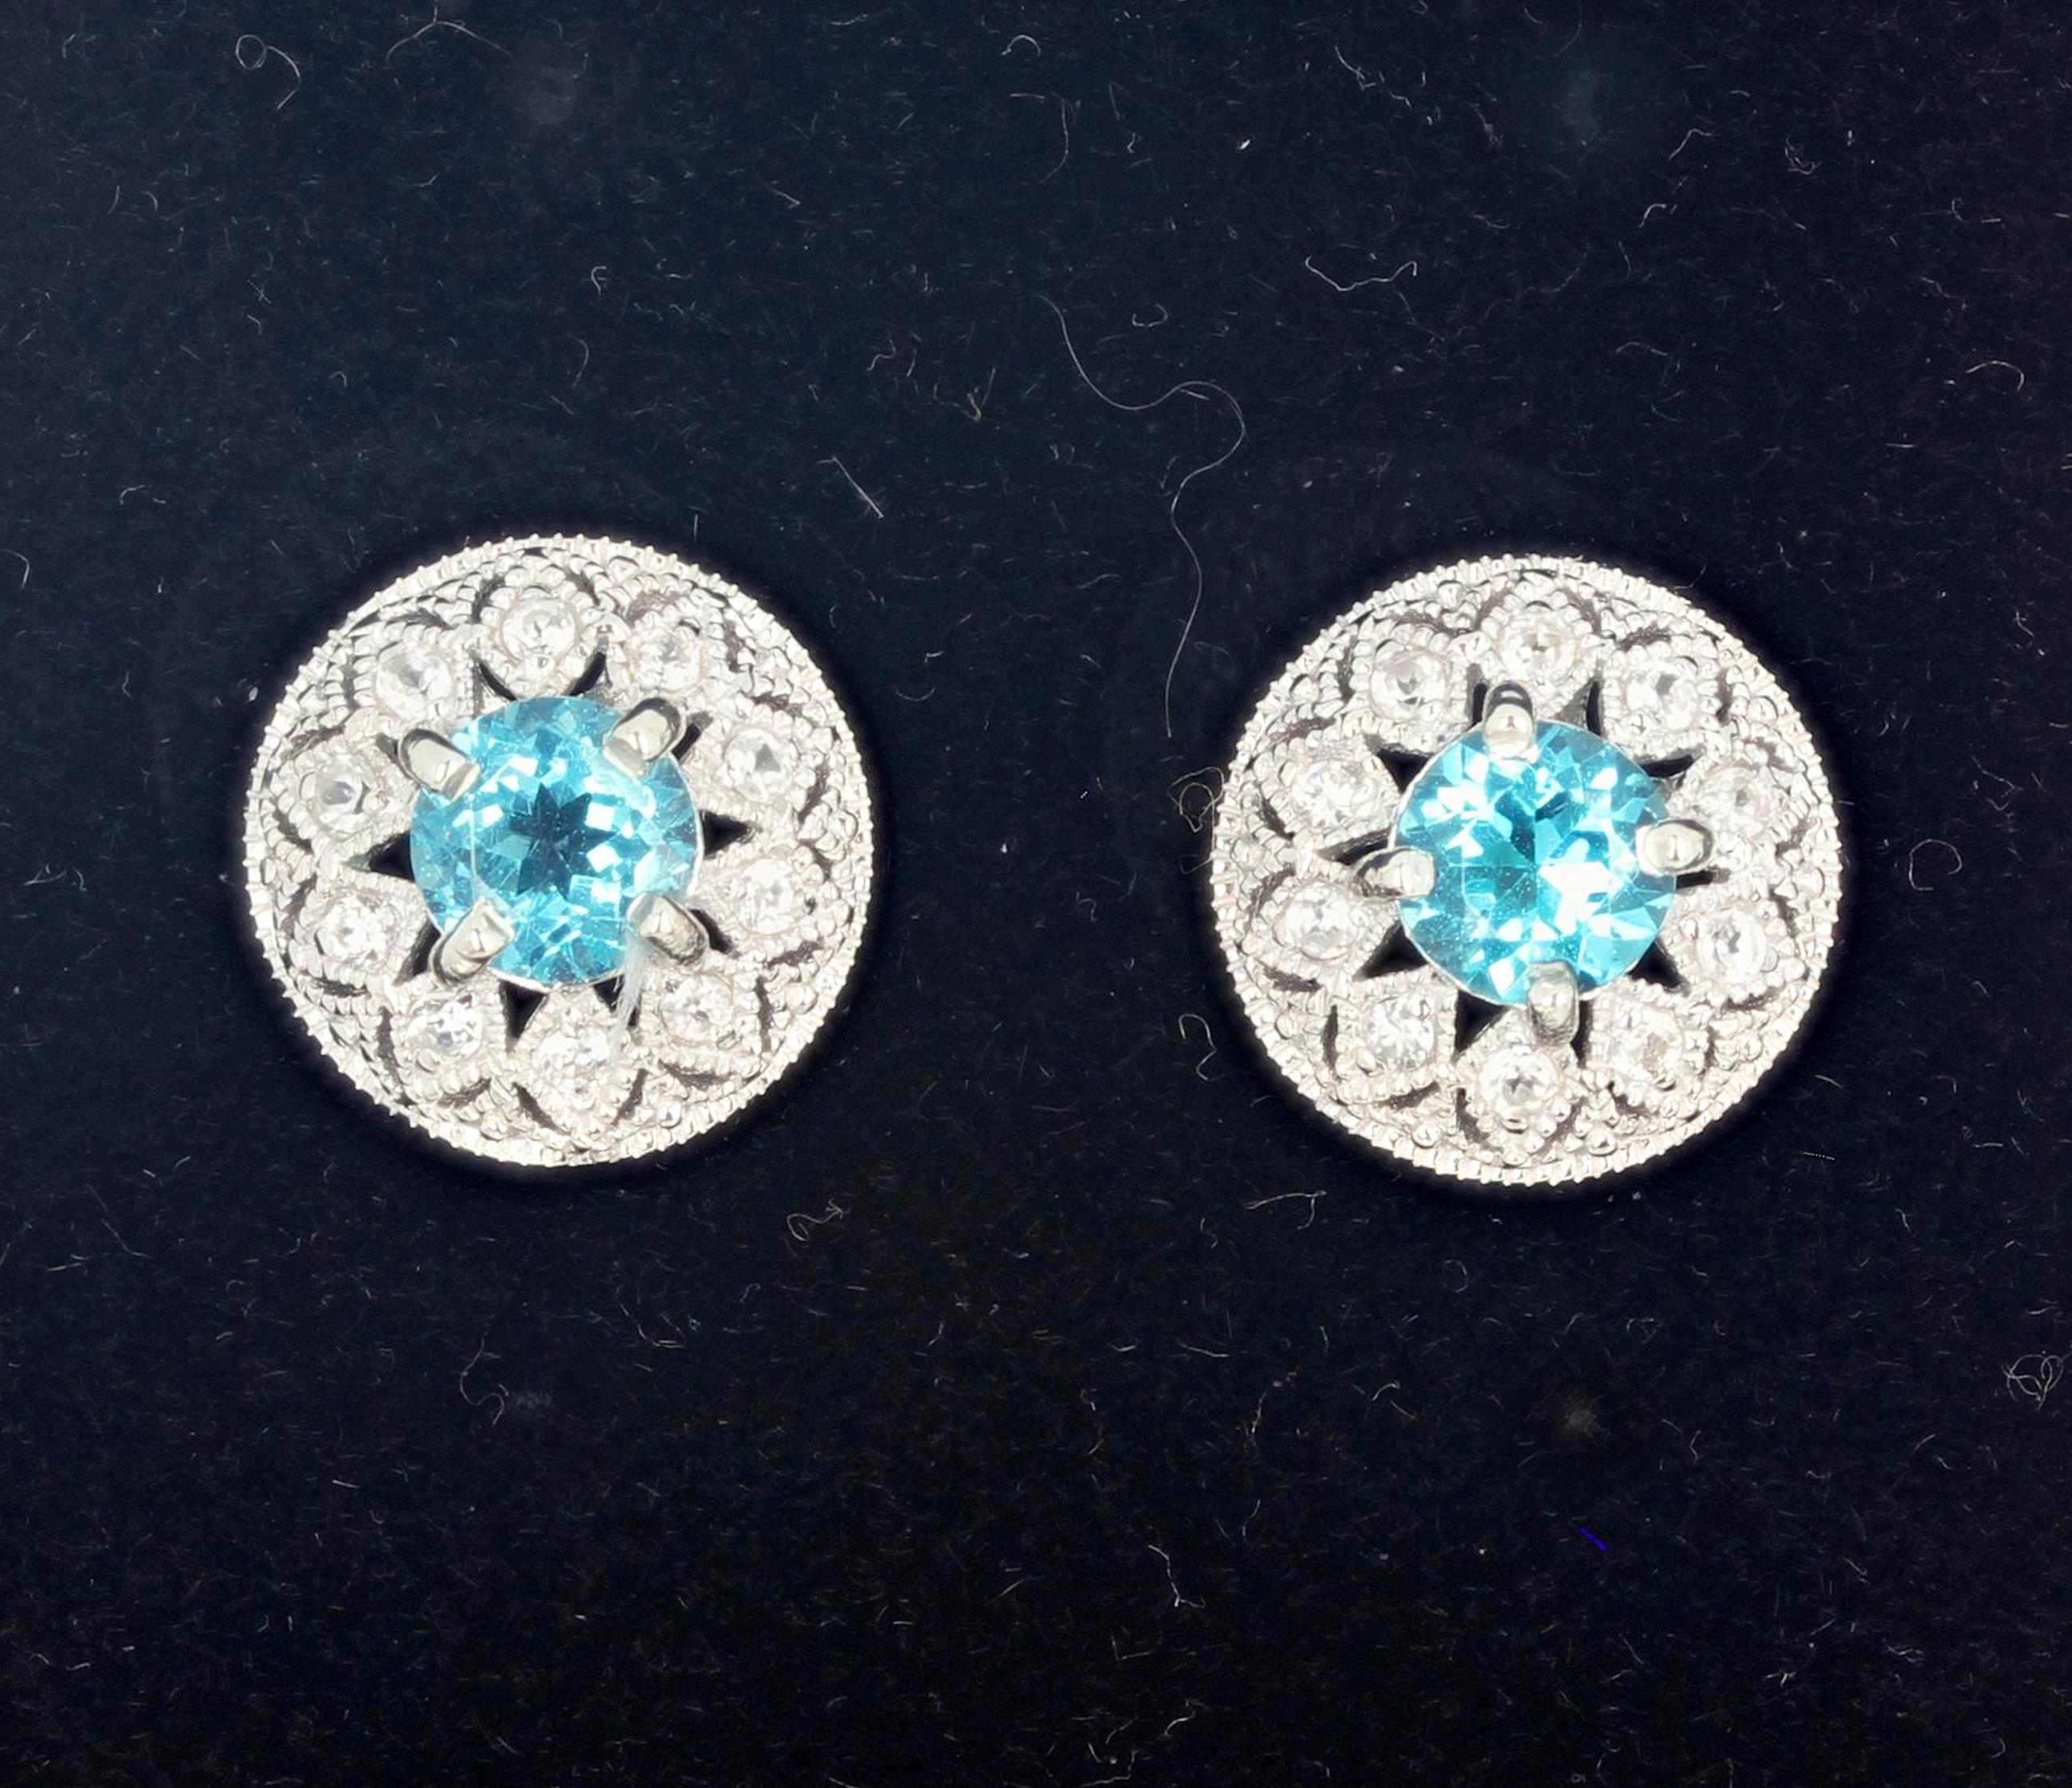 Brilliant blue round 1.82 carat Topaz (6 mm) enhanced with teeny tiny little white Diamonds set in rhodium (platinum) plated sterling silver stud earrings.  The earrings are approximately 13.5 mm.  These glitter day and night. If you wish faster